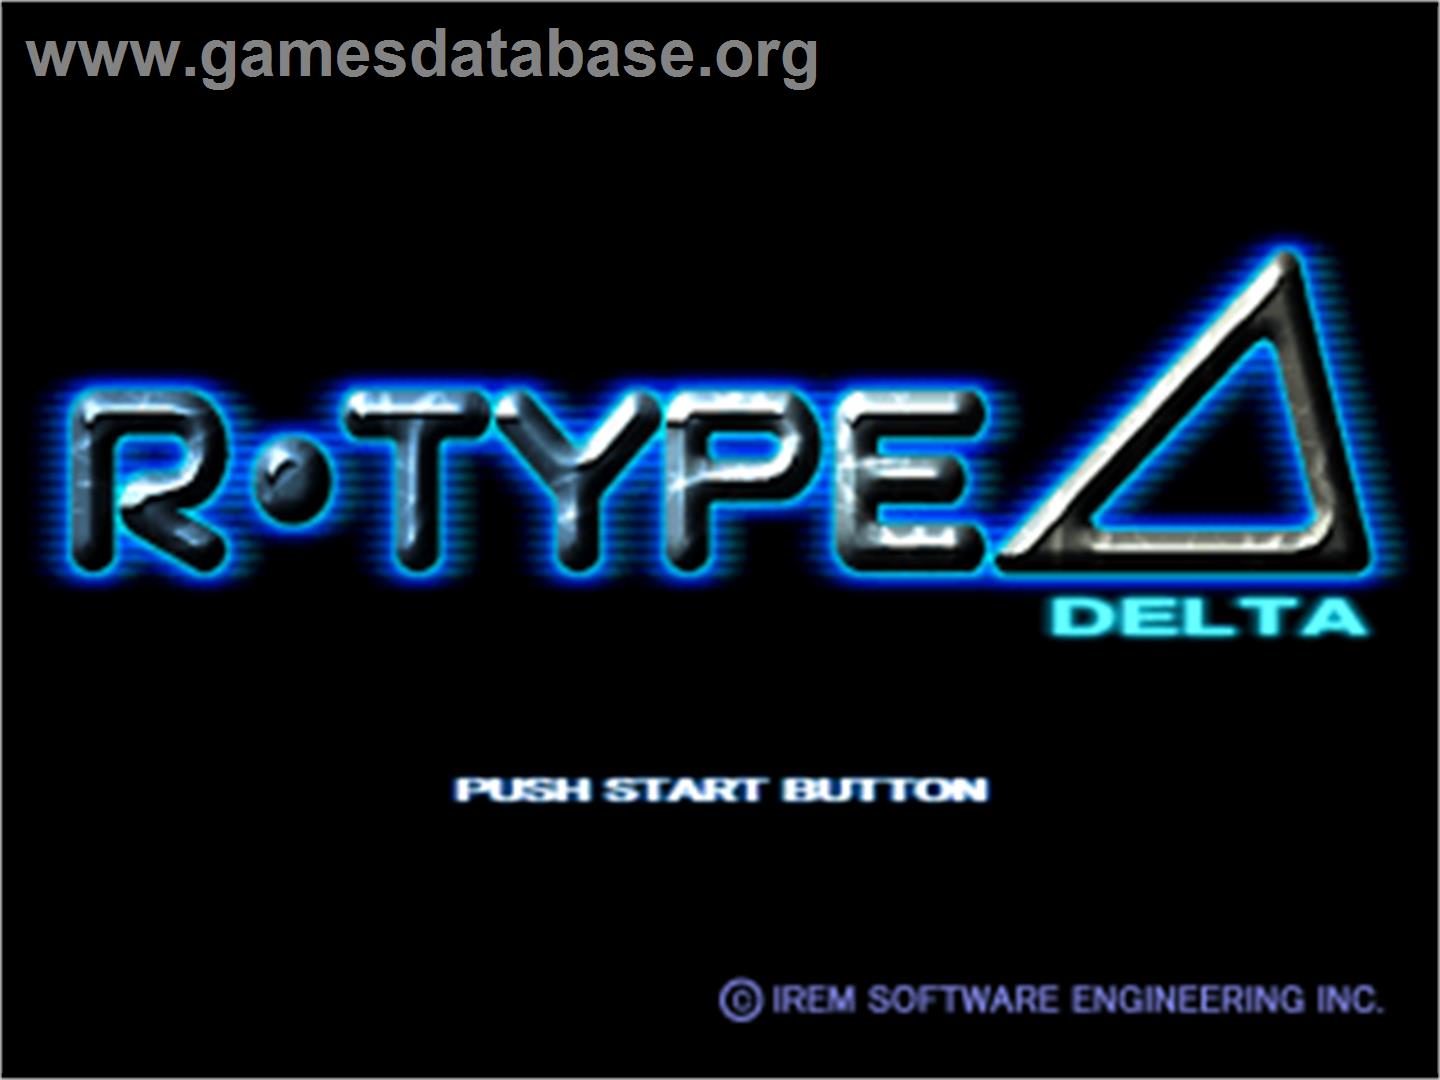 R-Type Delta - Sony Playstation - Artwork - Title Screen